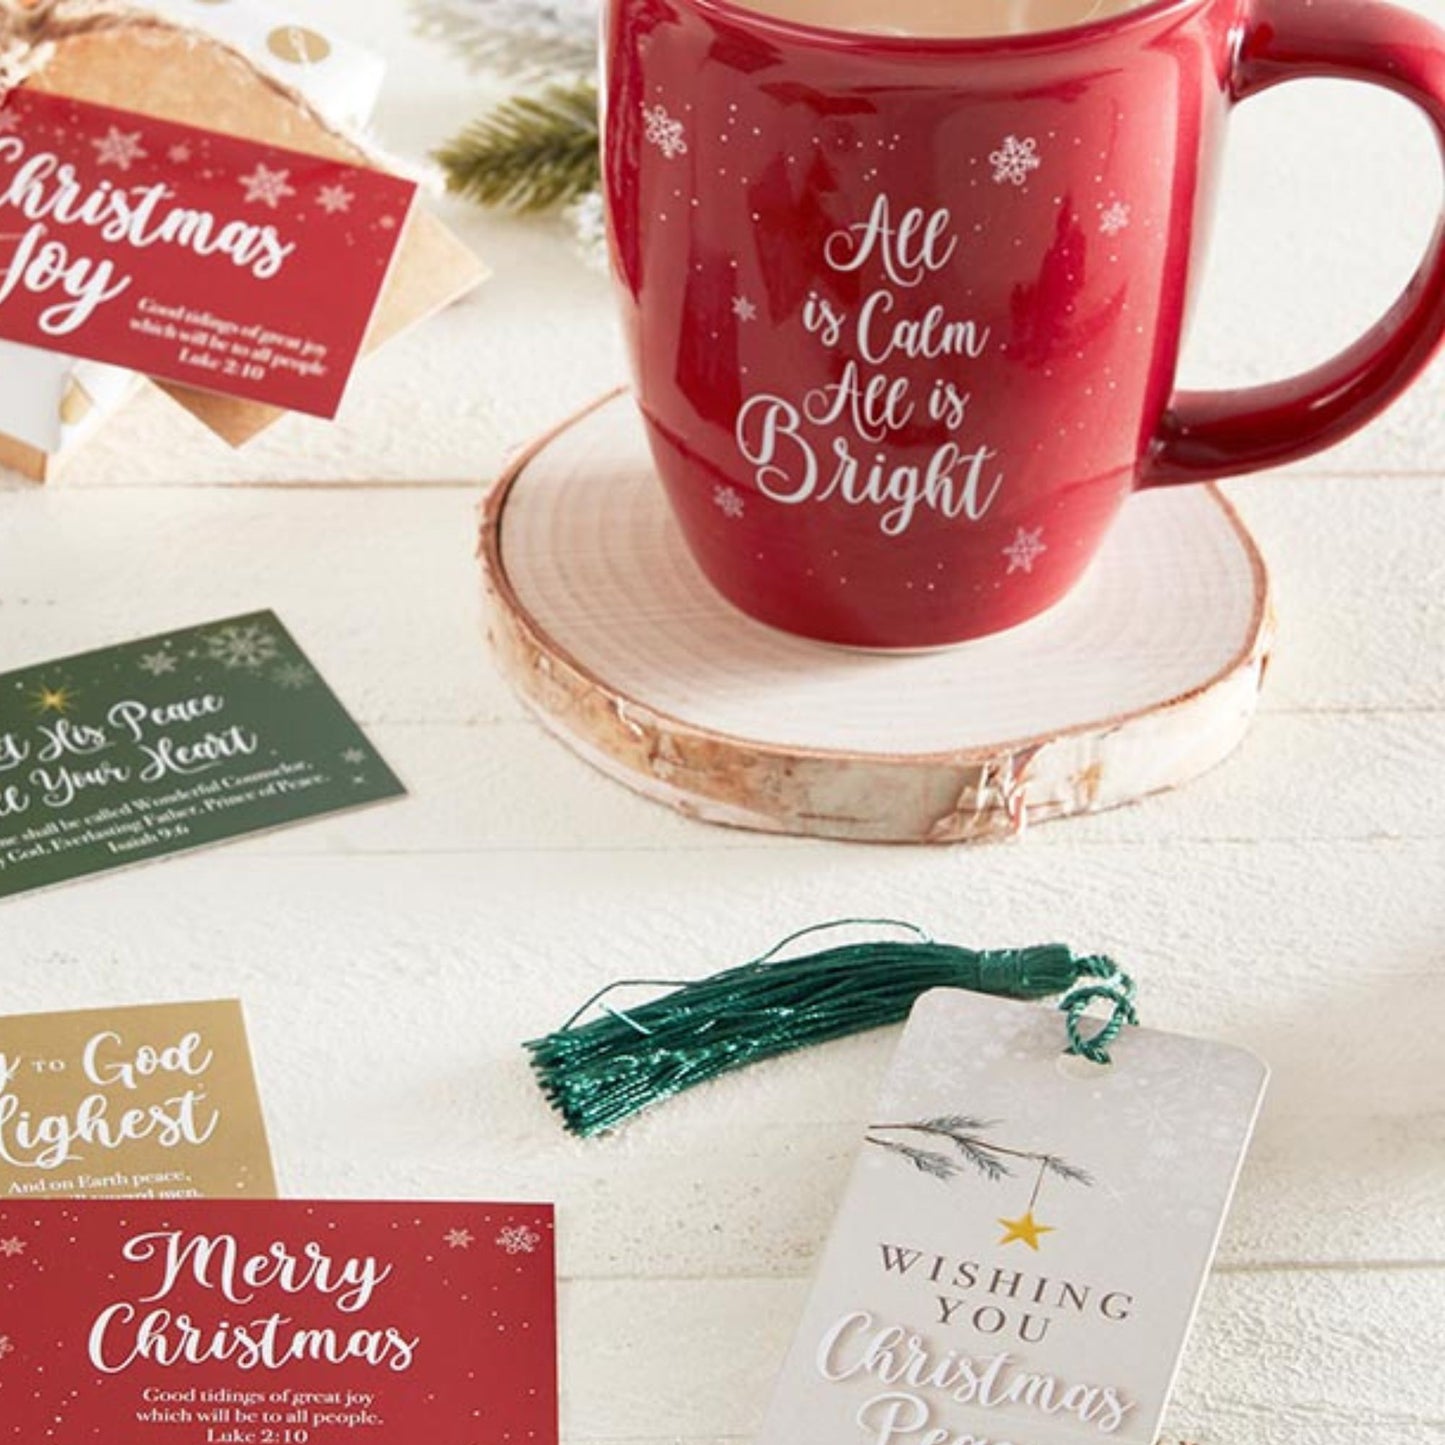 All is Calm All is Bright - Red Christmas Mug - Christian Drinkware shown with bookmark and wood coaster | oak7west.com